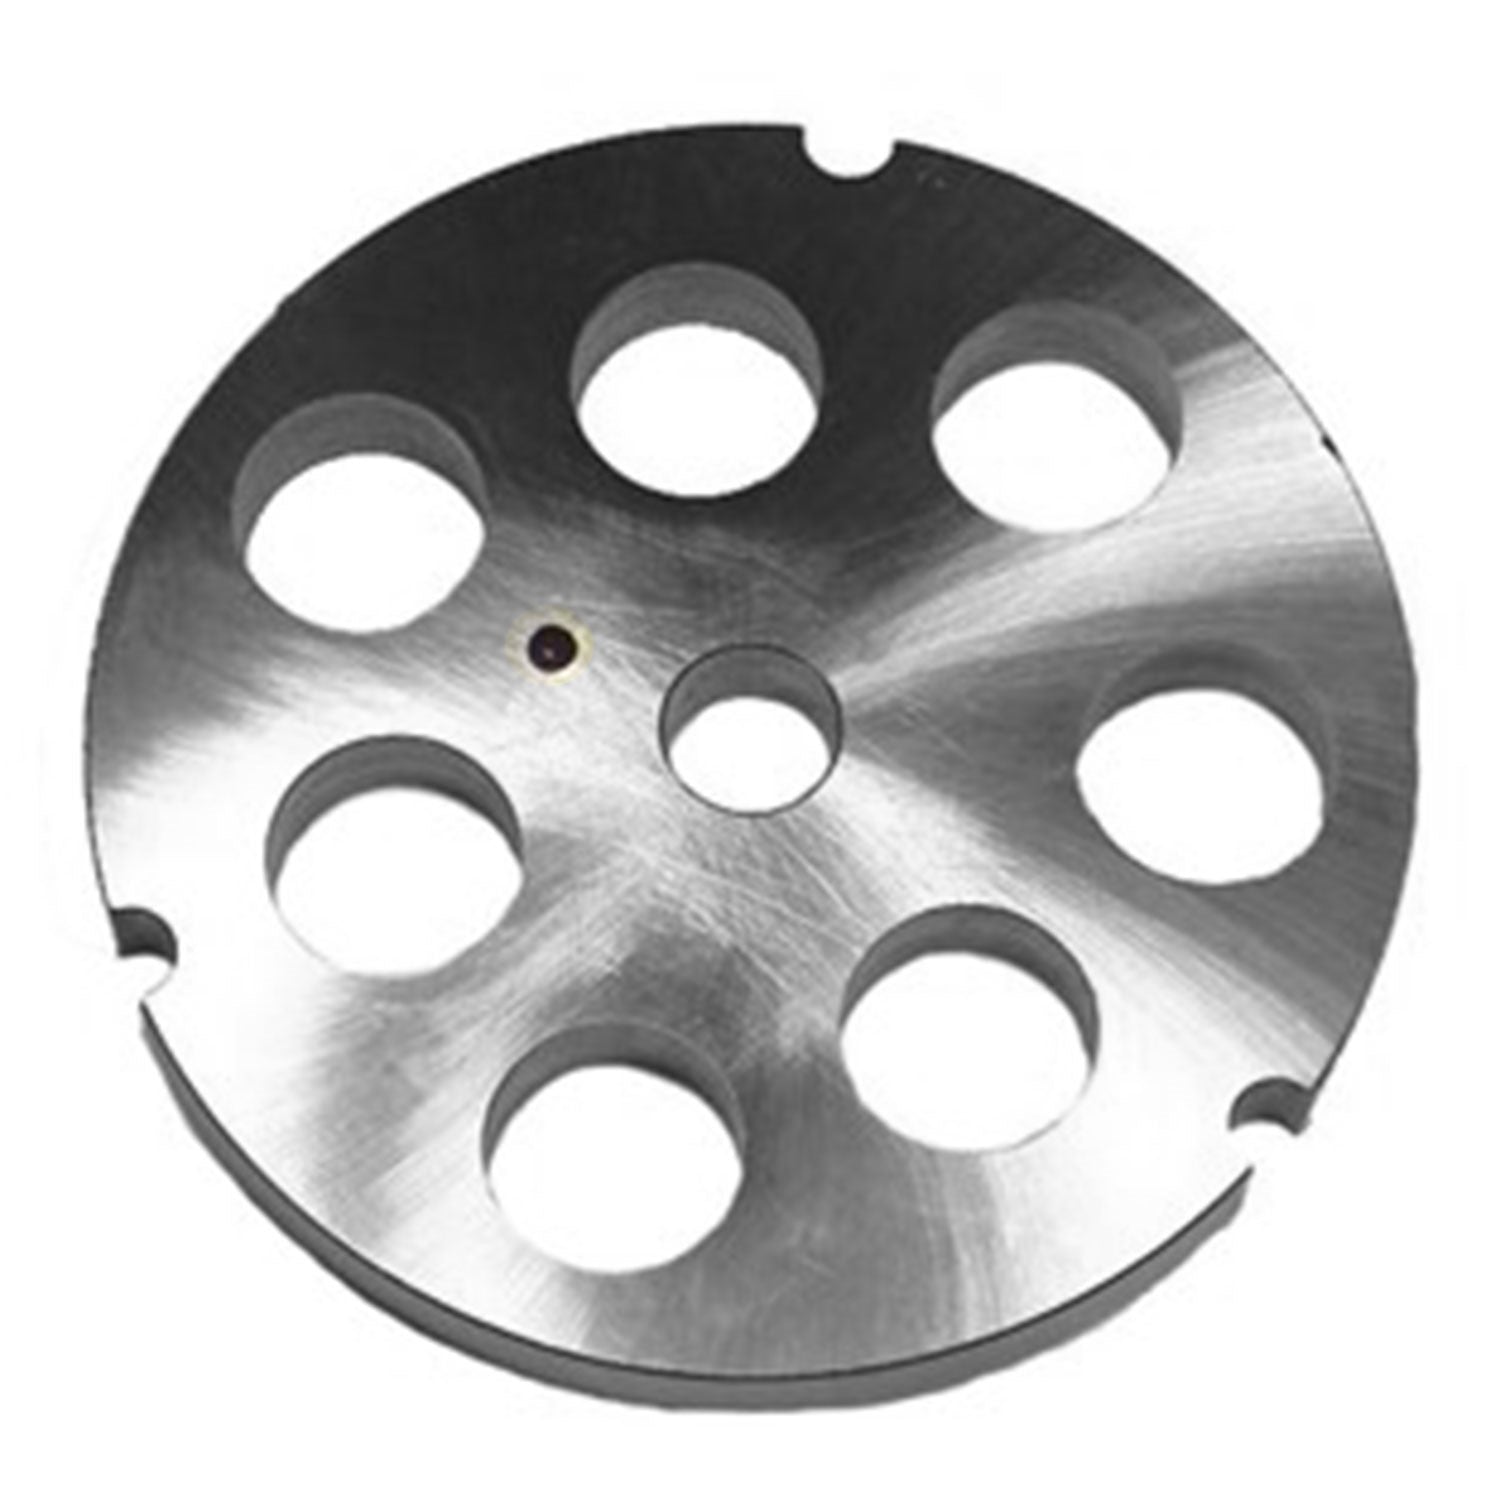 Size 32 DC Reversible Meat Grinder Plate, 3/4